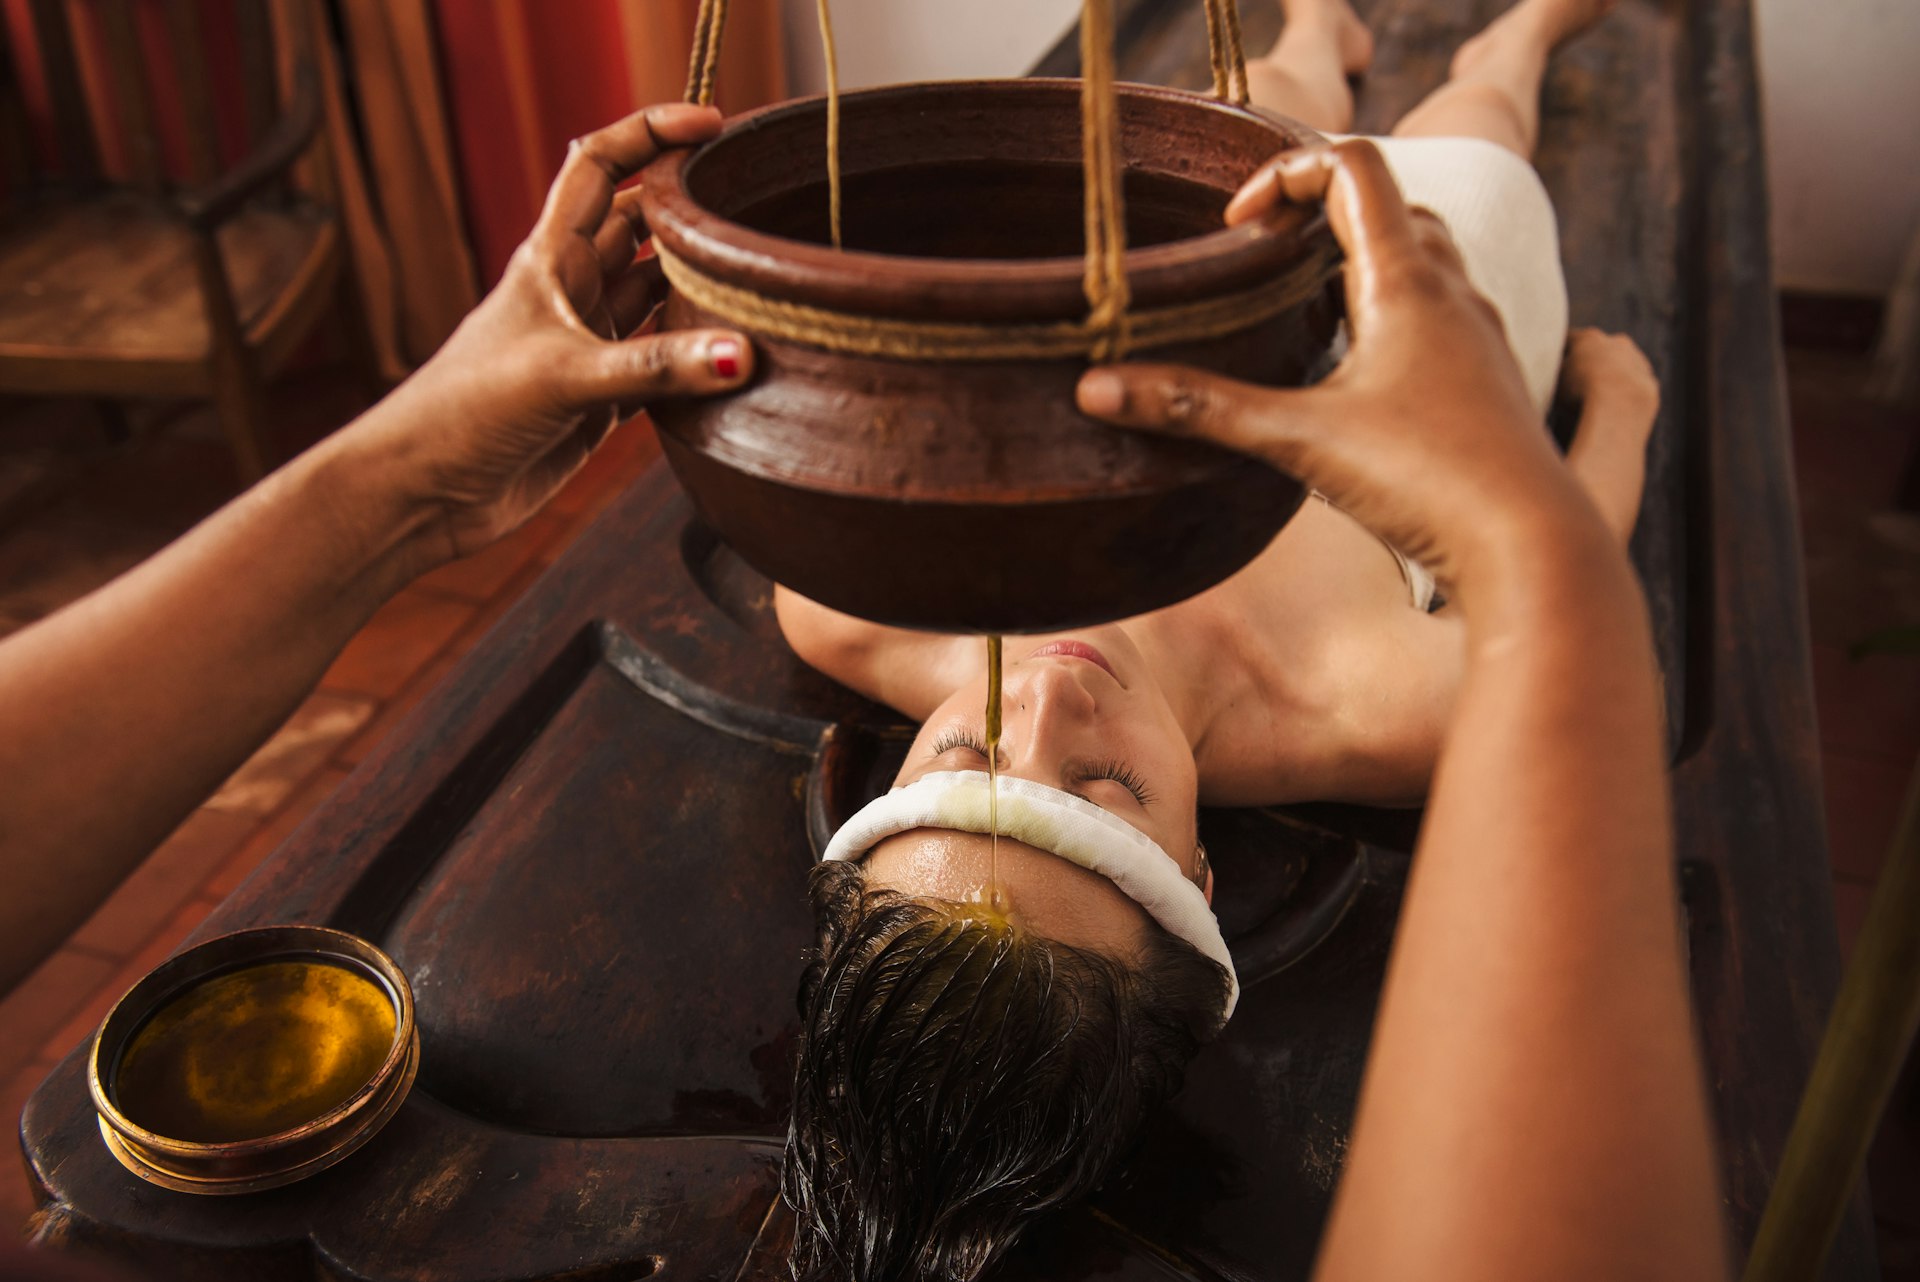 A woman lies on her back in a spa, as a honey-coloured liquid is poured on her forehead as part of an Ayurvedic wellness treatment